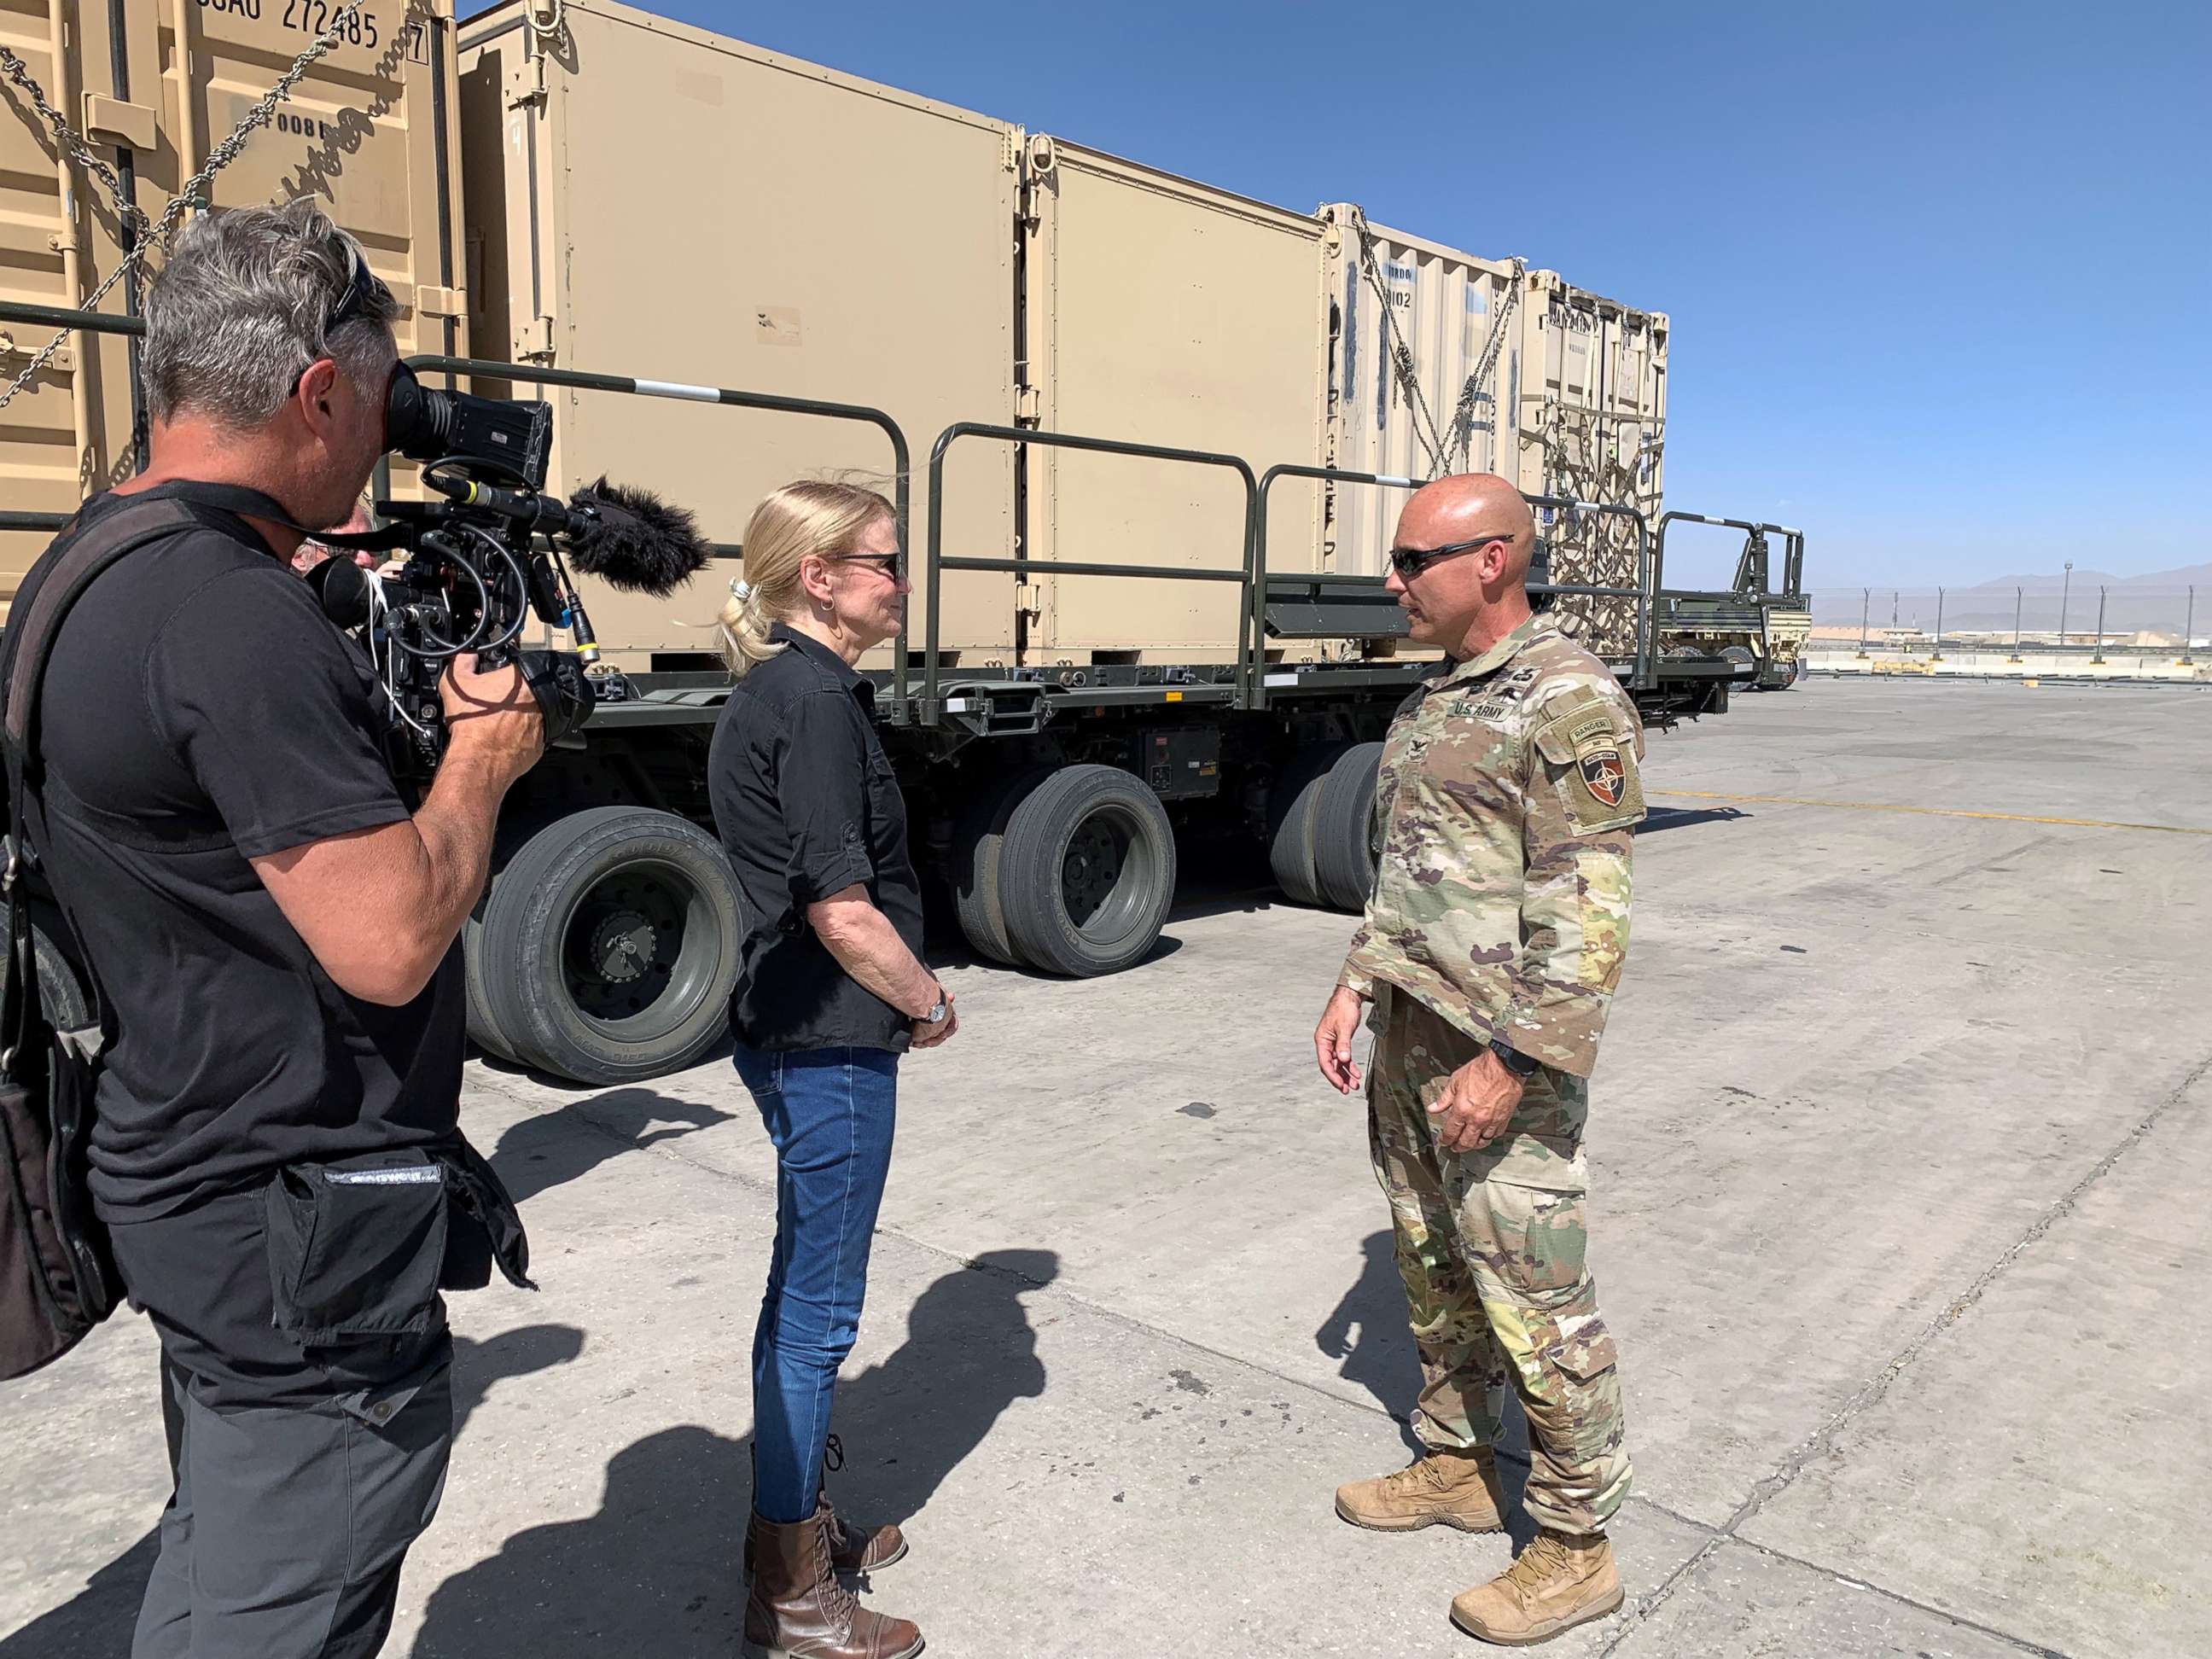 PHOTO: ABC News' Chief Global Affairs Correspondent Martha Raddatz interviews Army Col. Mike Scarpulla of the 10th Mountain Division at Bagram Air Base in Afghanistan in June 2021.